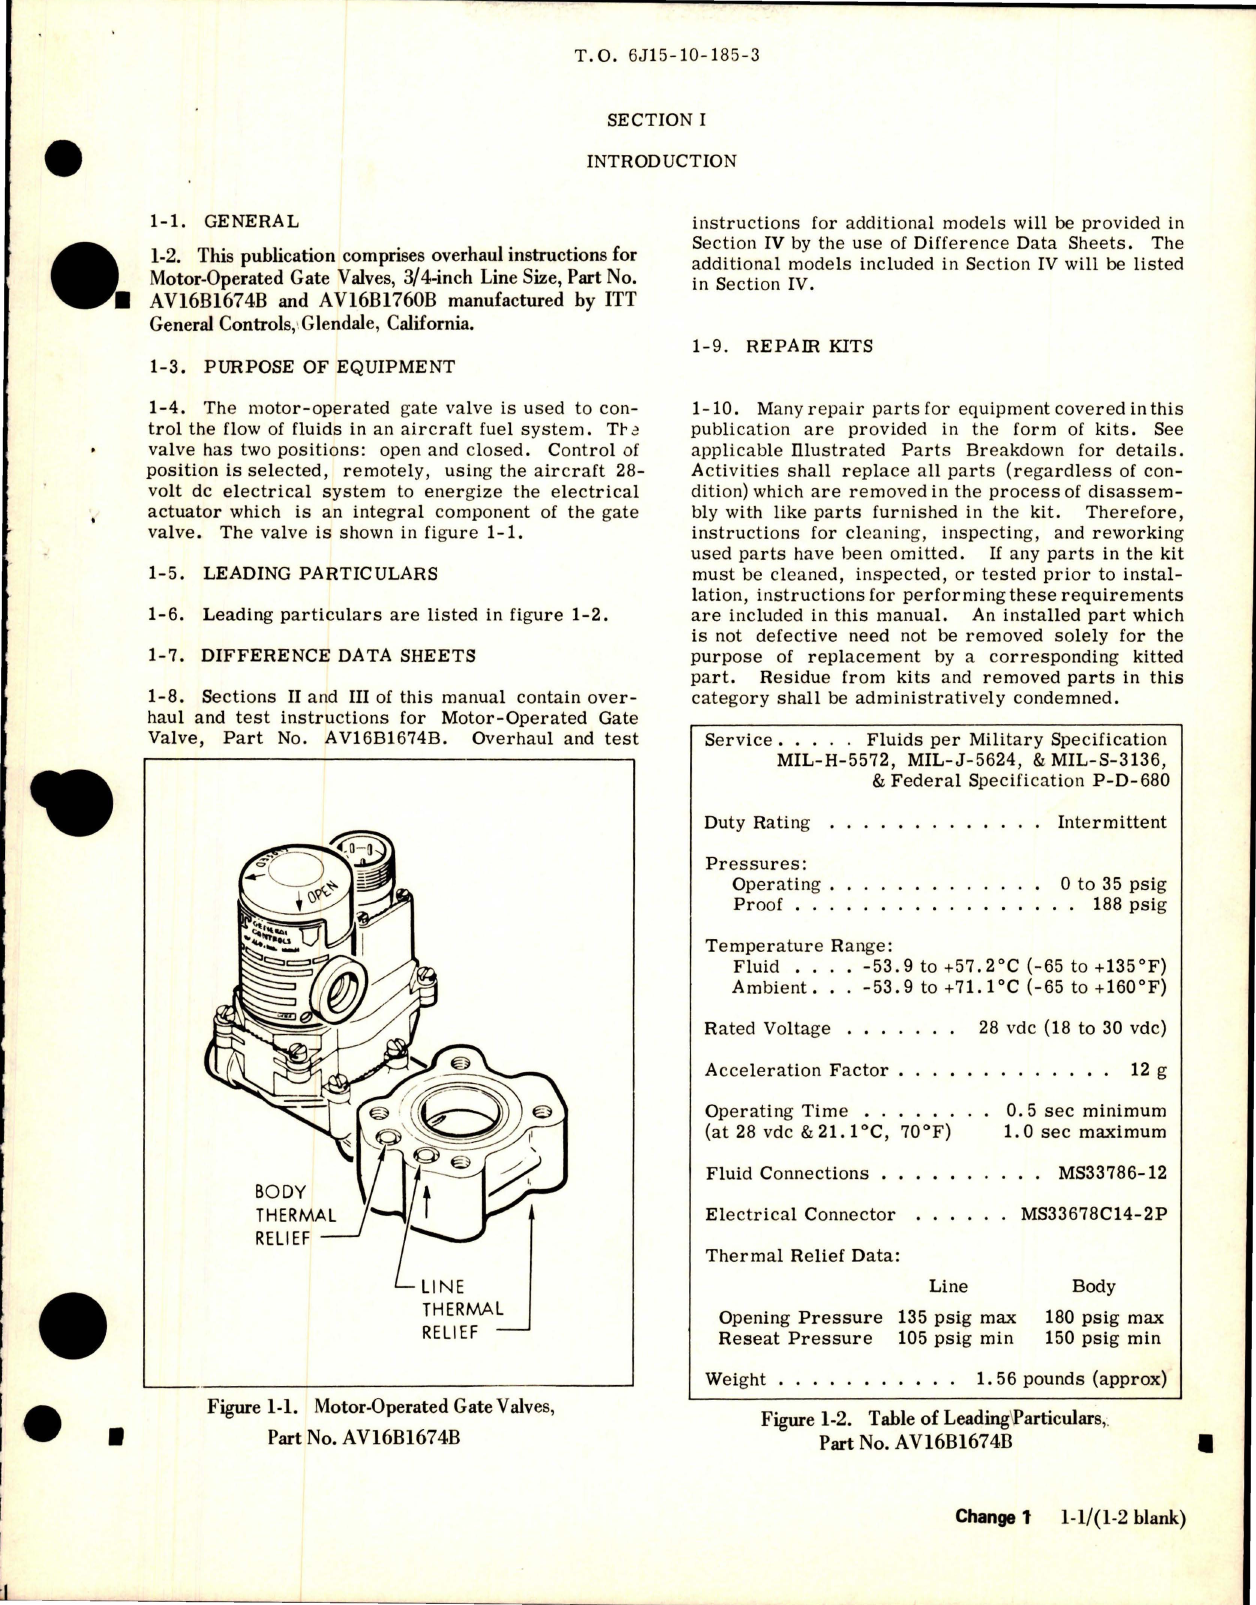 Sample page 5 from AirCorps Library document: Overhaul Instructions for Motor Operated Gate Valve - Parts AV16B1674B and AV16B1760B 